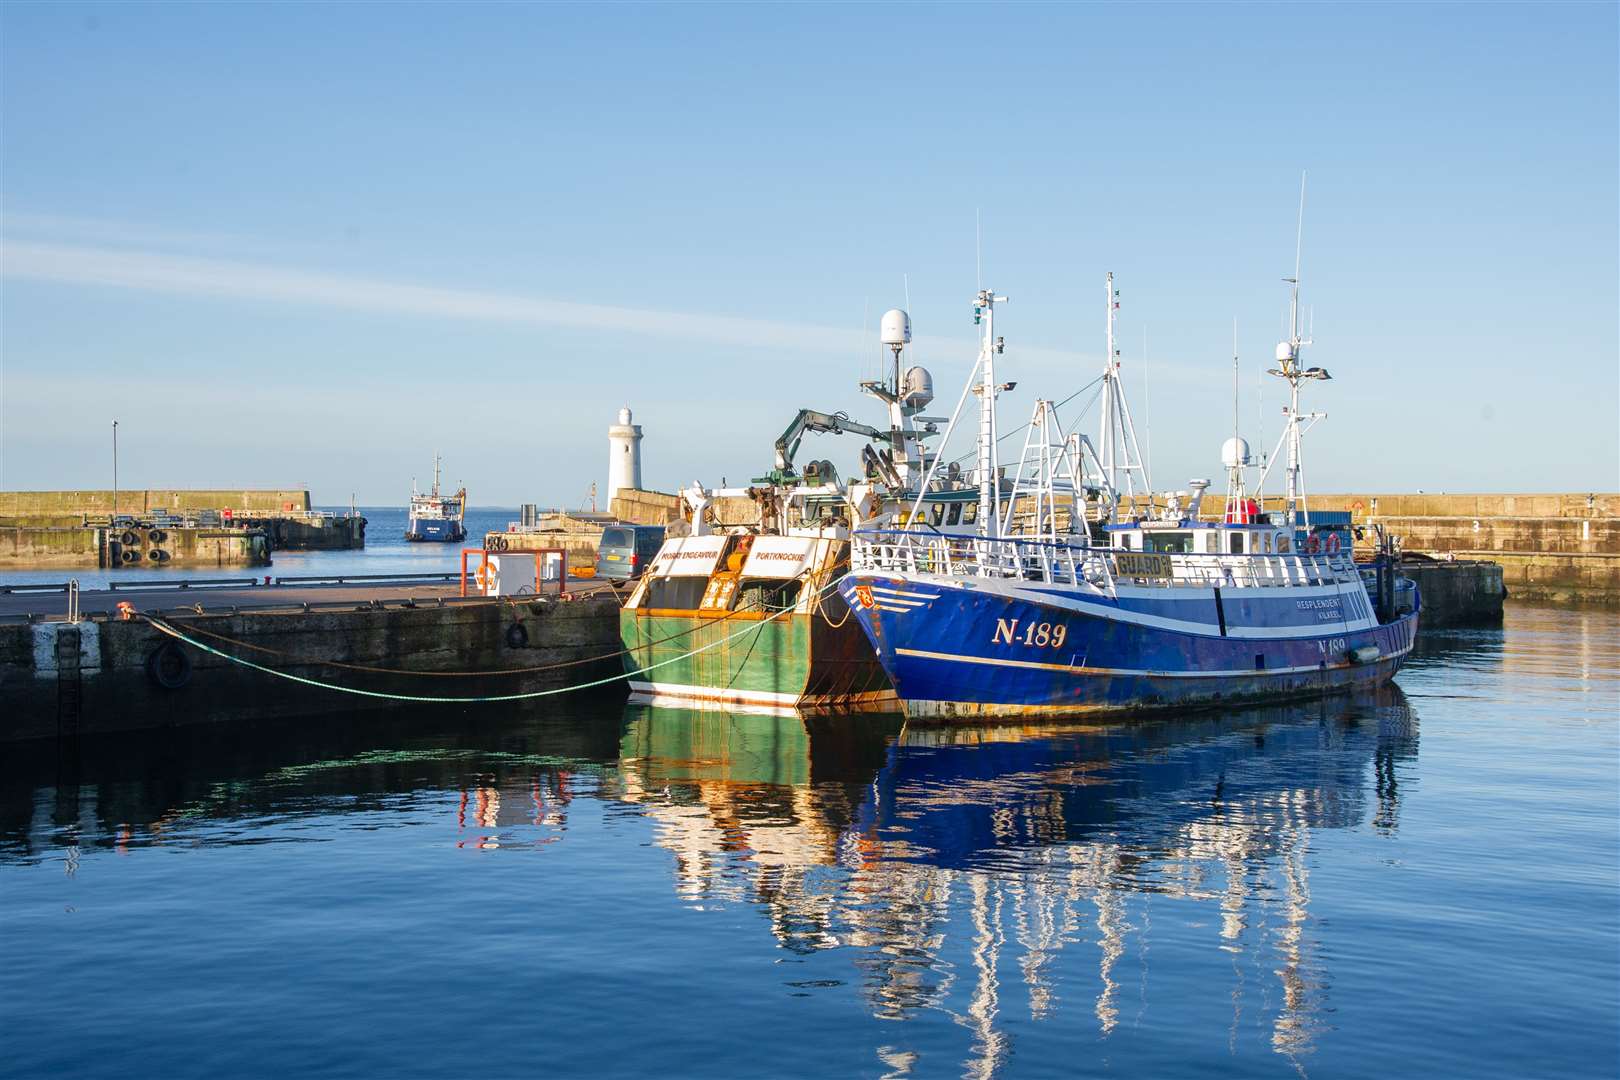 It was a very quiet week on the fish landings front at Buckie Harbour.